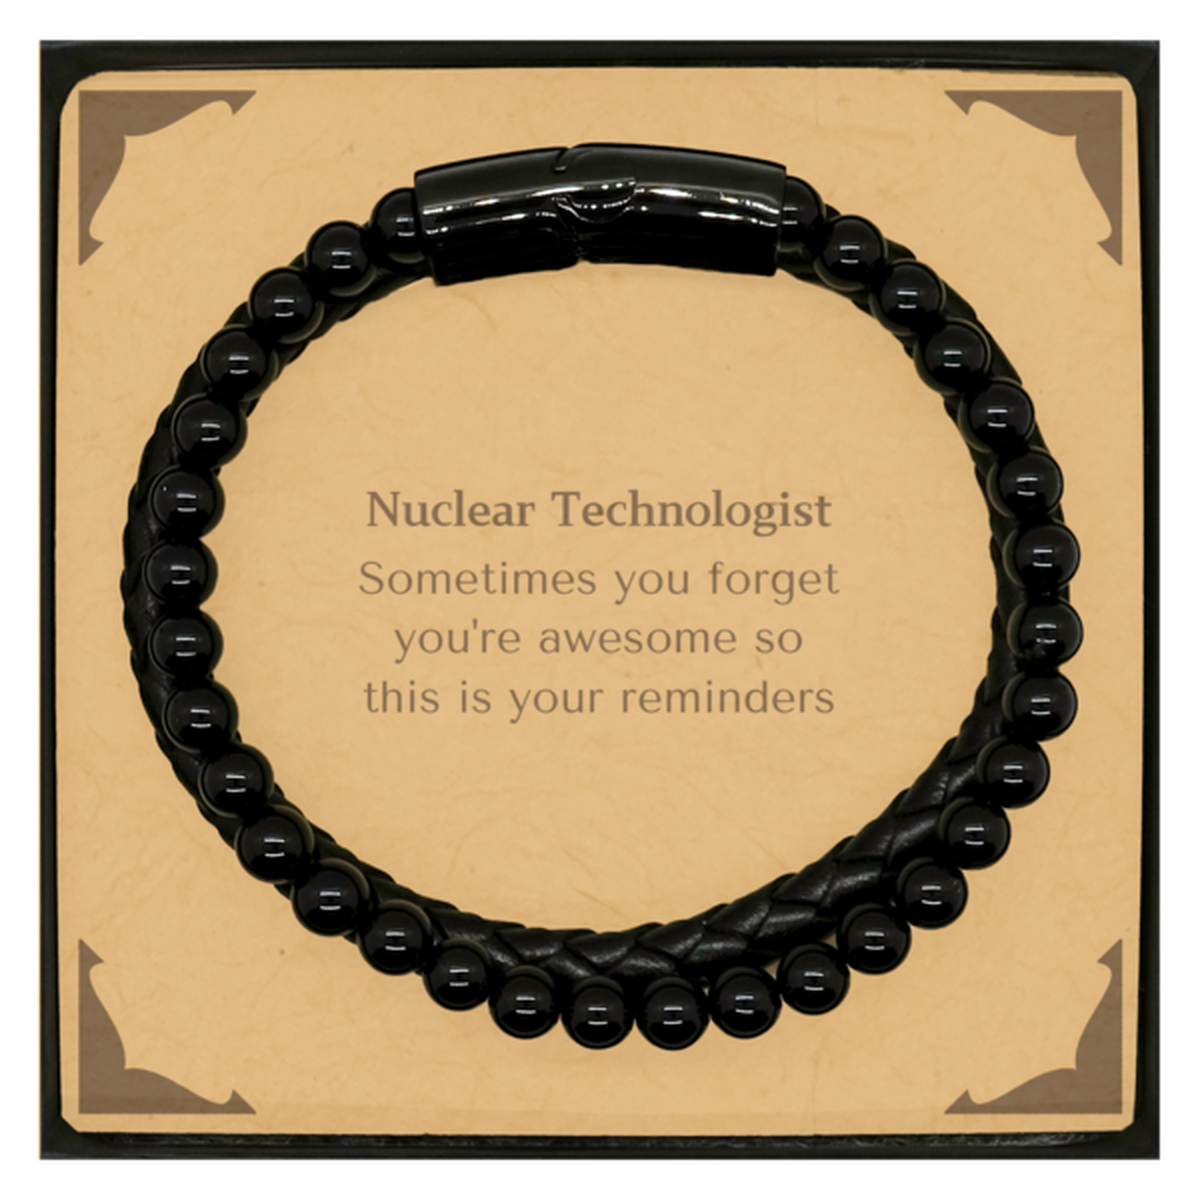 Sentimental Nuclear Technologist Stone Leather Bracelets, Nuclear Technologist Sometimes you forget you're awesome so this is your reminders, Graduation Christmas Birthday Gifts for Nuclear Technologist, Men, Women, Coworkers